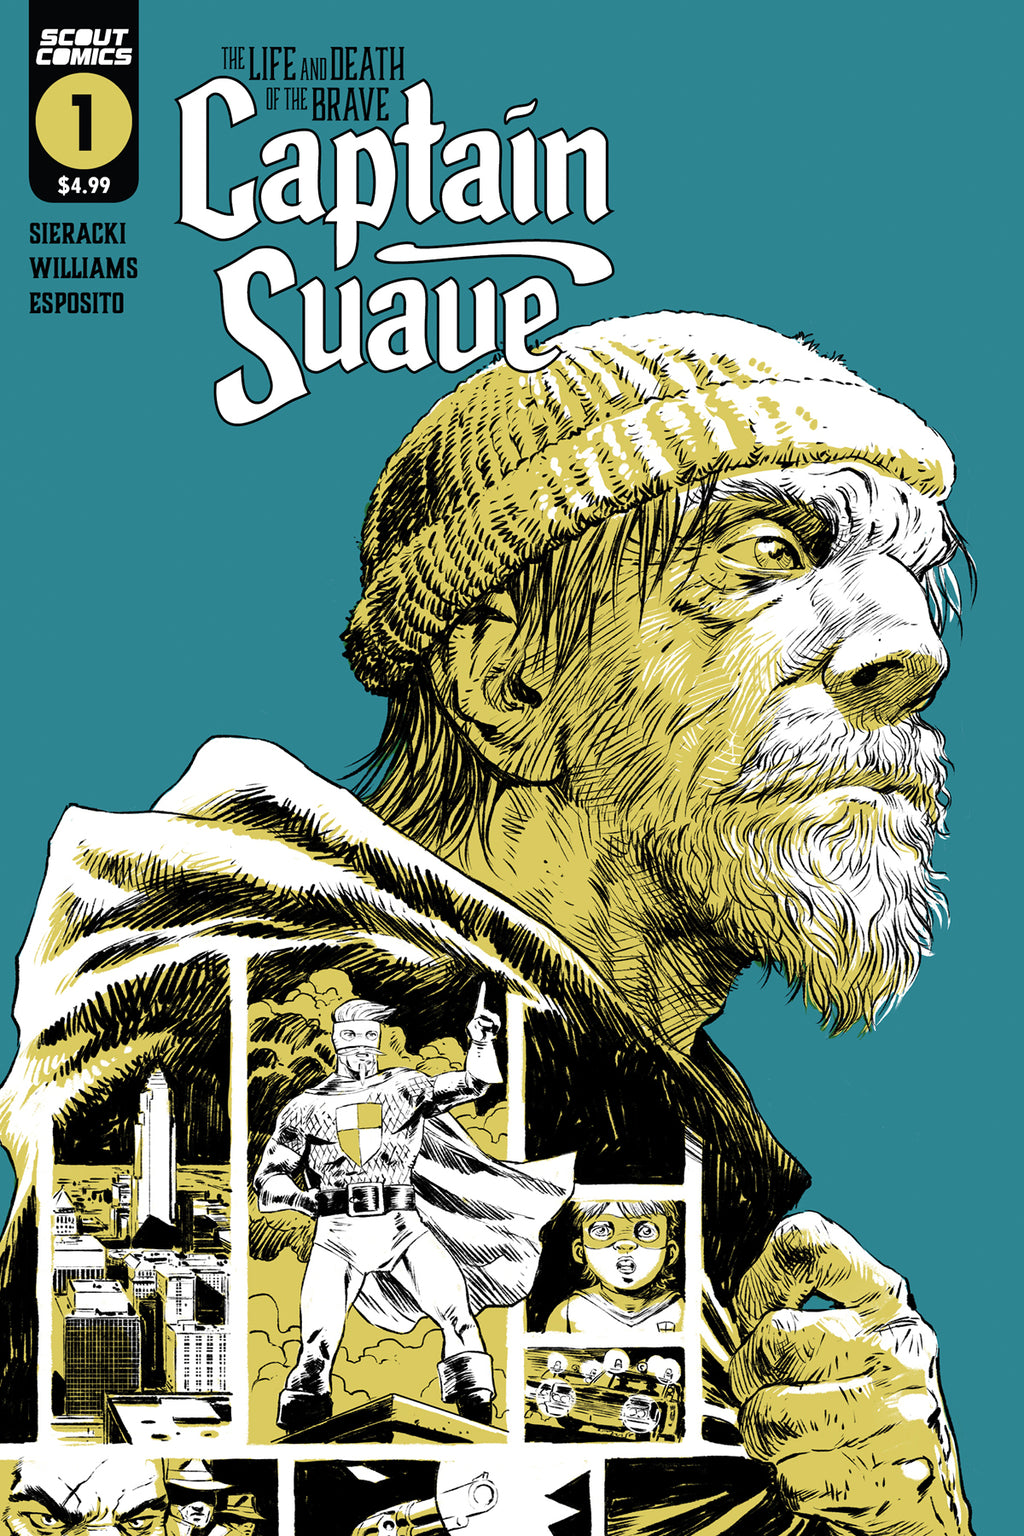 Life And Death Of The Brave Captain Suave #1 - WhatNot/Webstore Variant Cover (Dave Wachter)